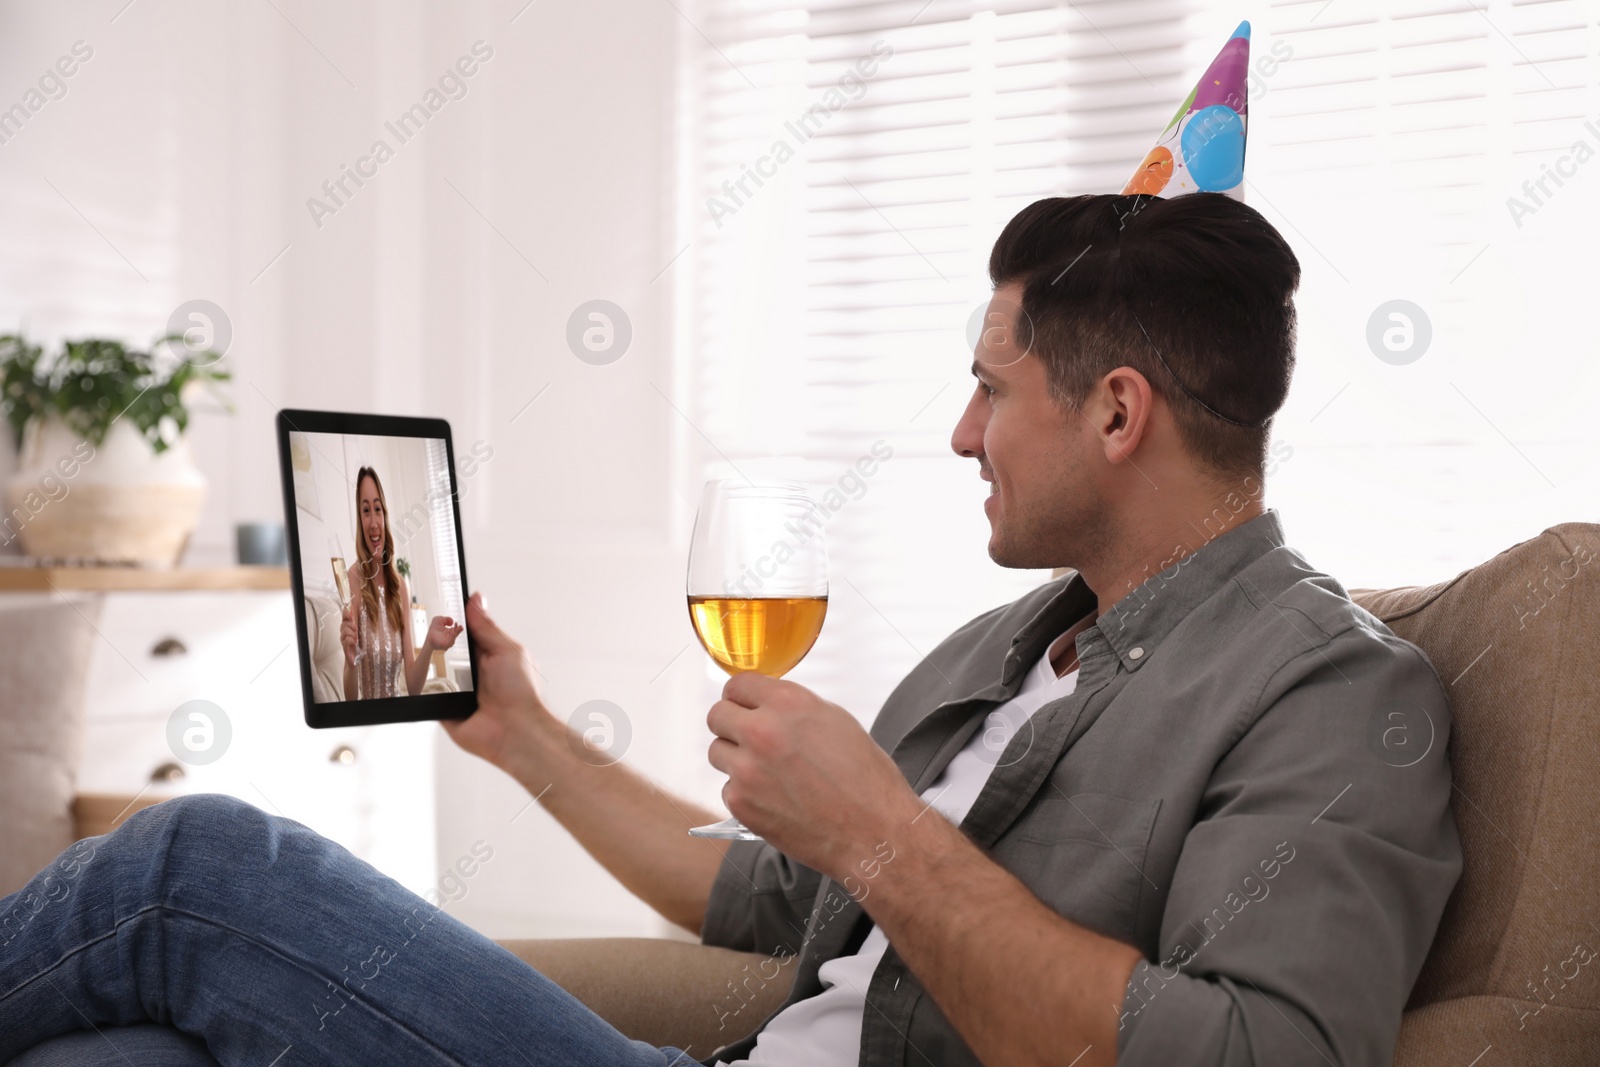 Image of Man with glass of wine having online party via tablet  at home during quarantine lockdown